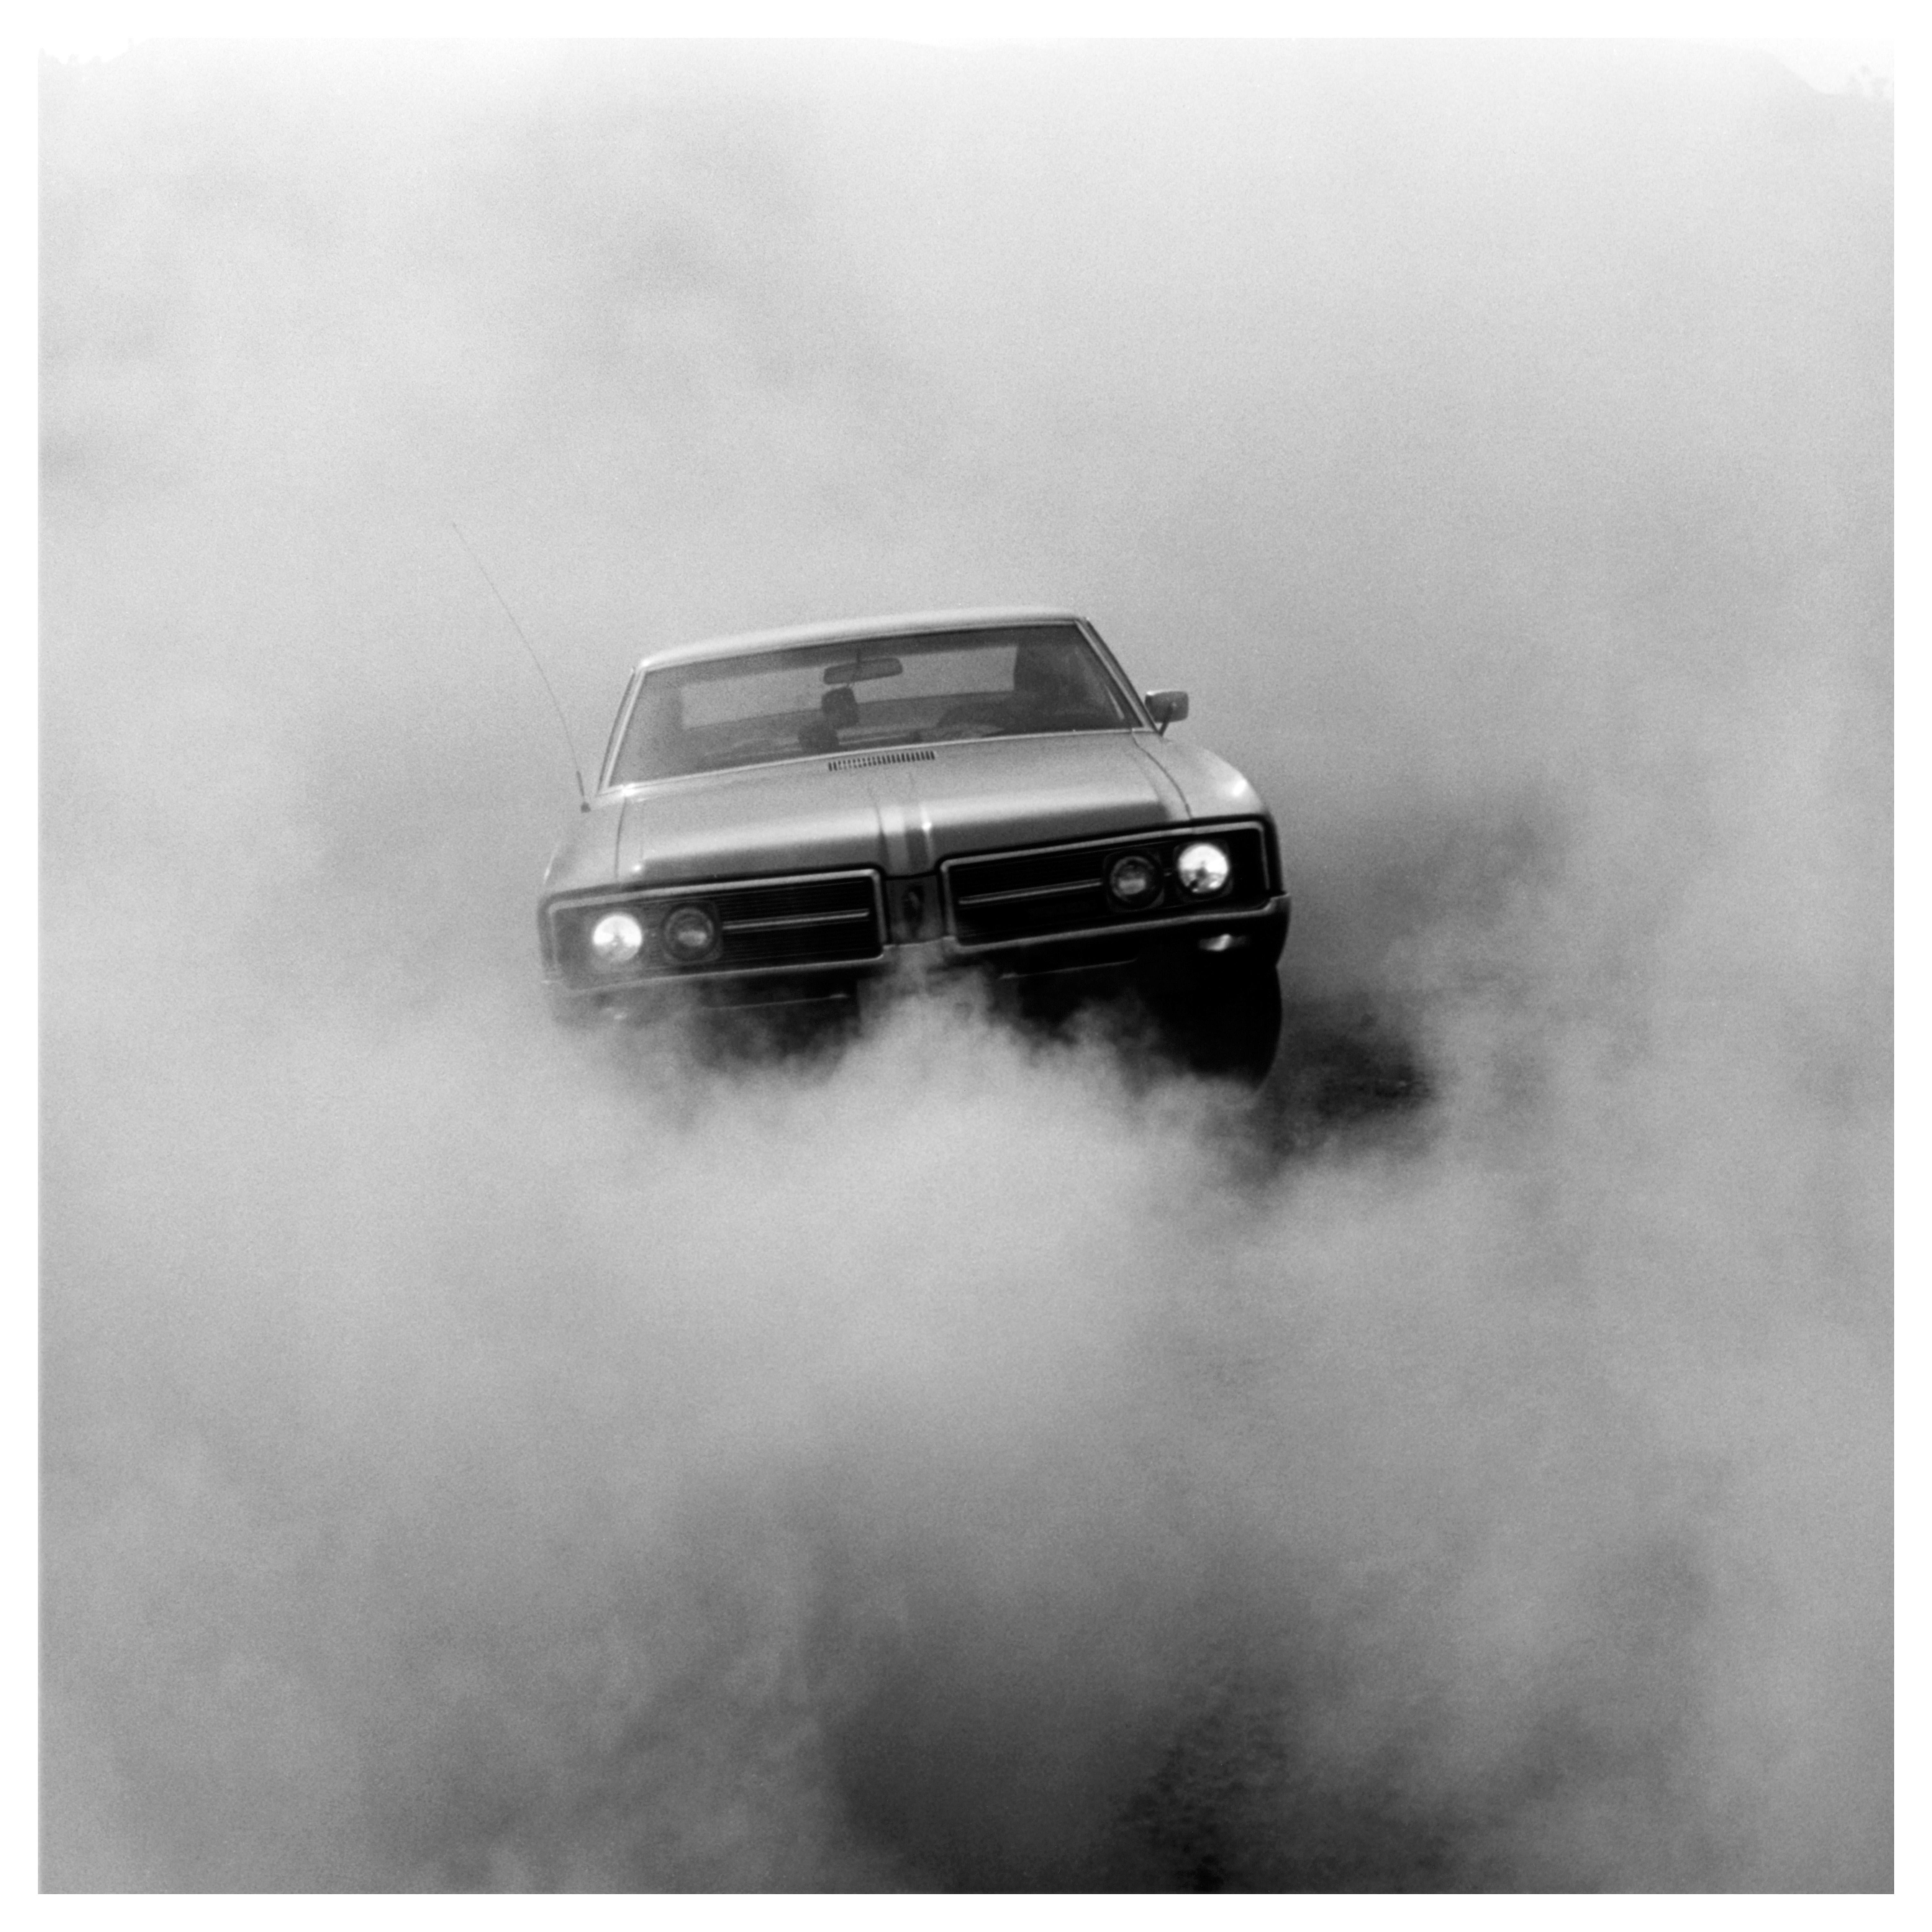 Buick in the Dust, Hemsby - Black and White Square Car Photography